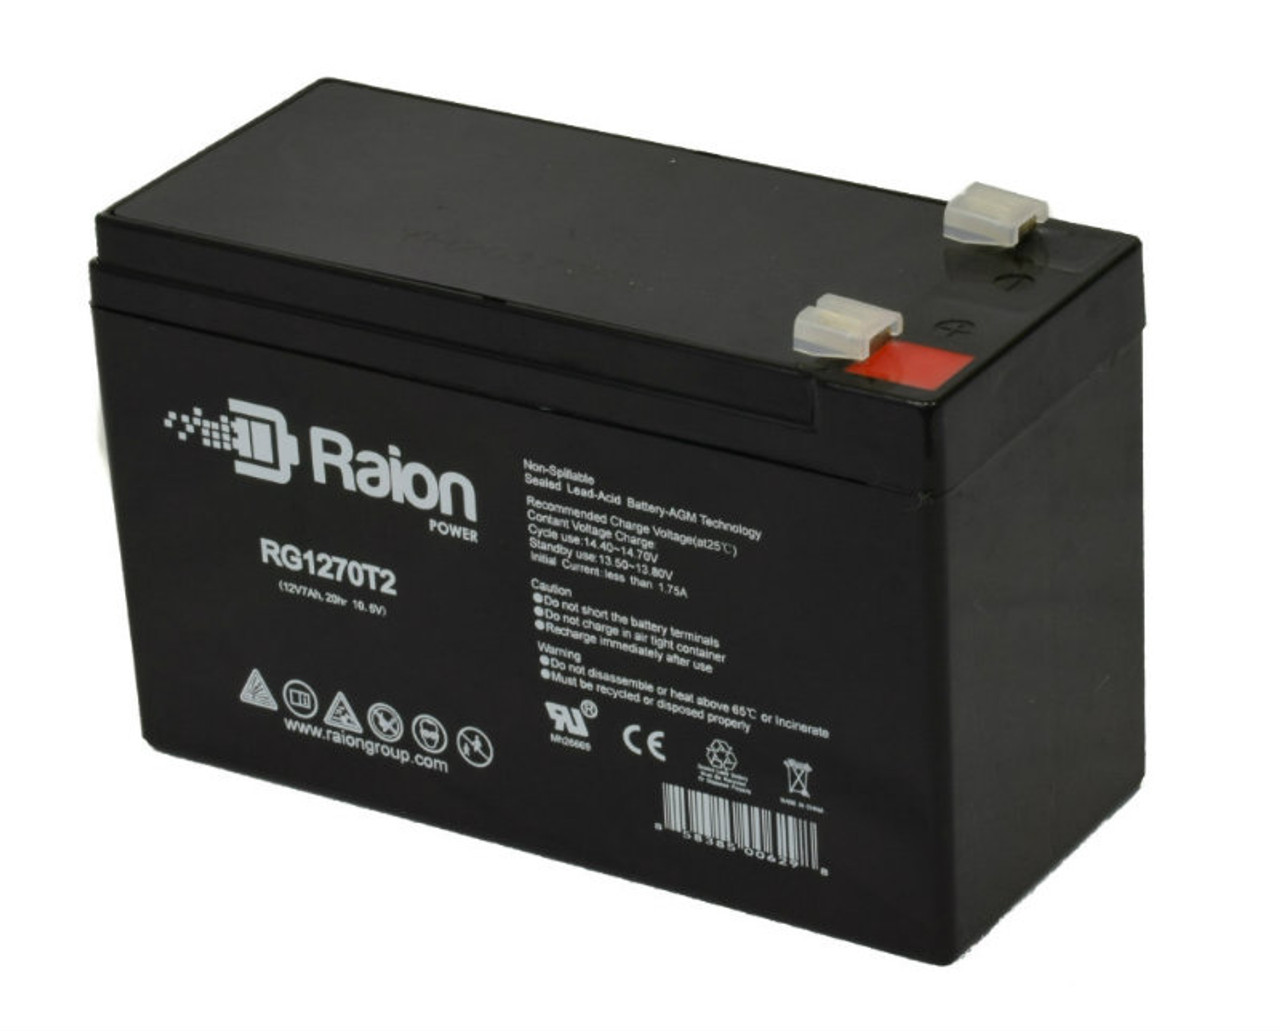 Raion Power Replacement 12V 7Ah Battery for Exell EB1270F1 - 1 Pack